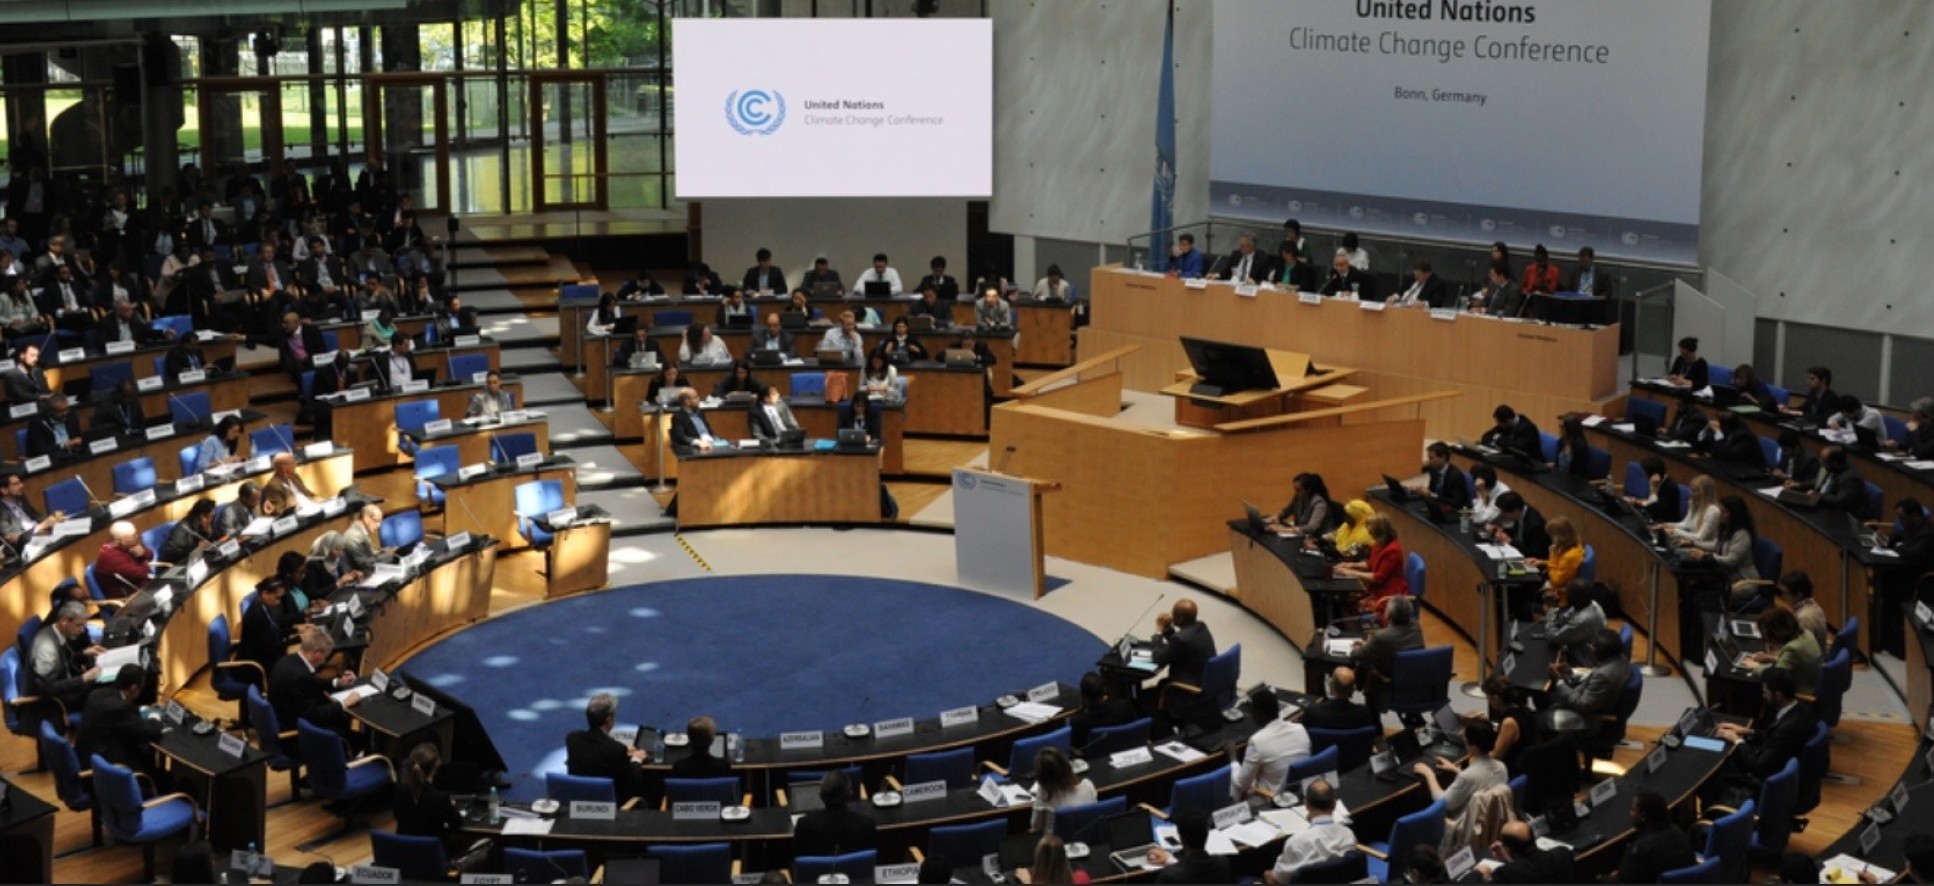 Photo shows a conference all with wooden desks, with smartly dressed people sitting. Large screen reads: United Nations Climate Change Conference, Bonn, Germany